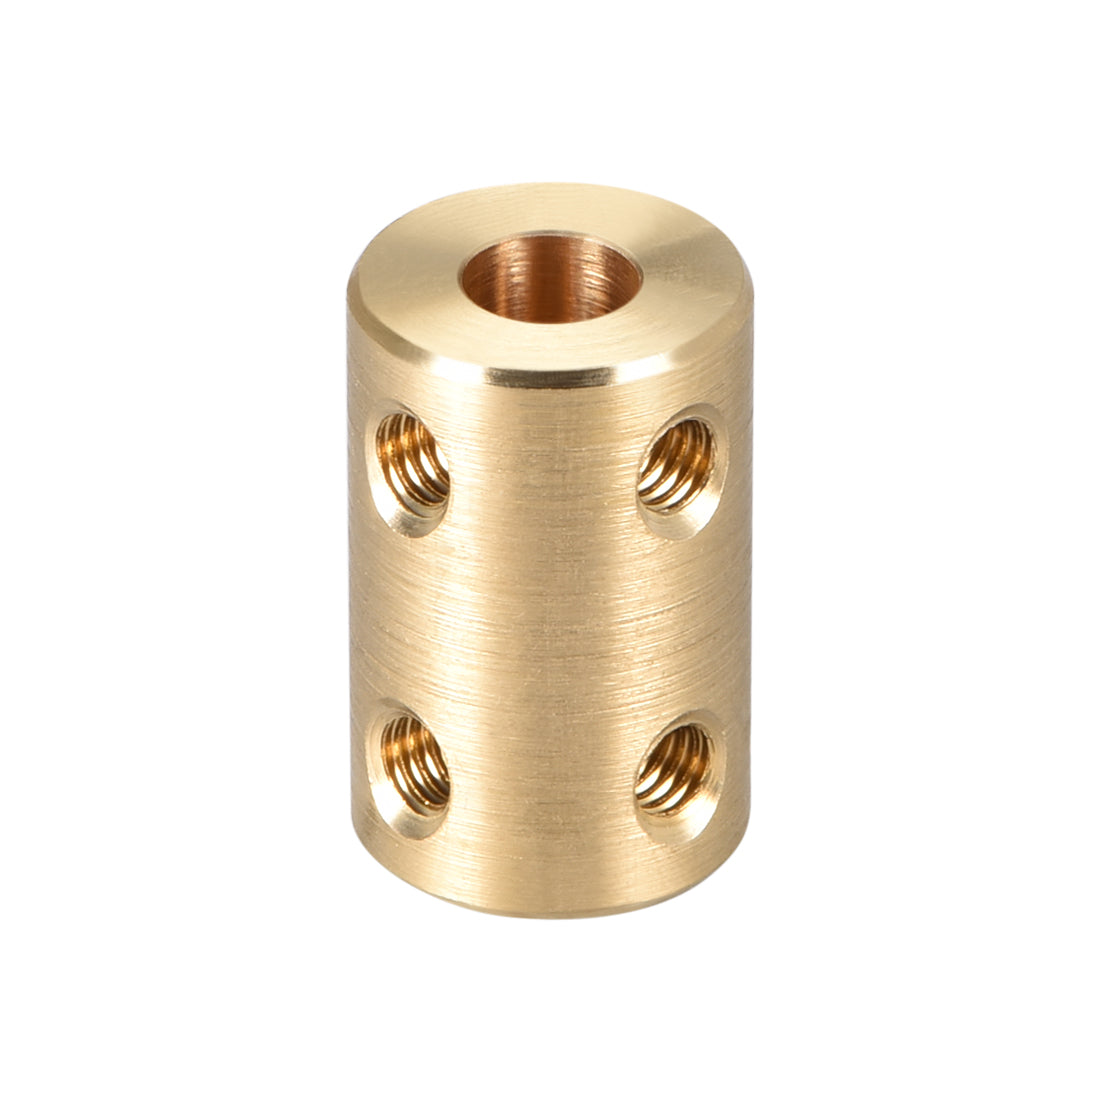 uxcell Uxcell Shaft Coupling 6mm to 8mm Bore L22xD14 Robot Motor Wheel Rigid Coupler Connector Gold Tone